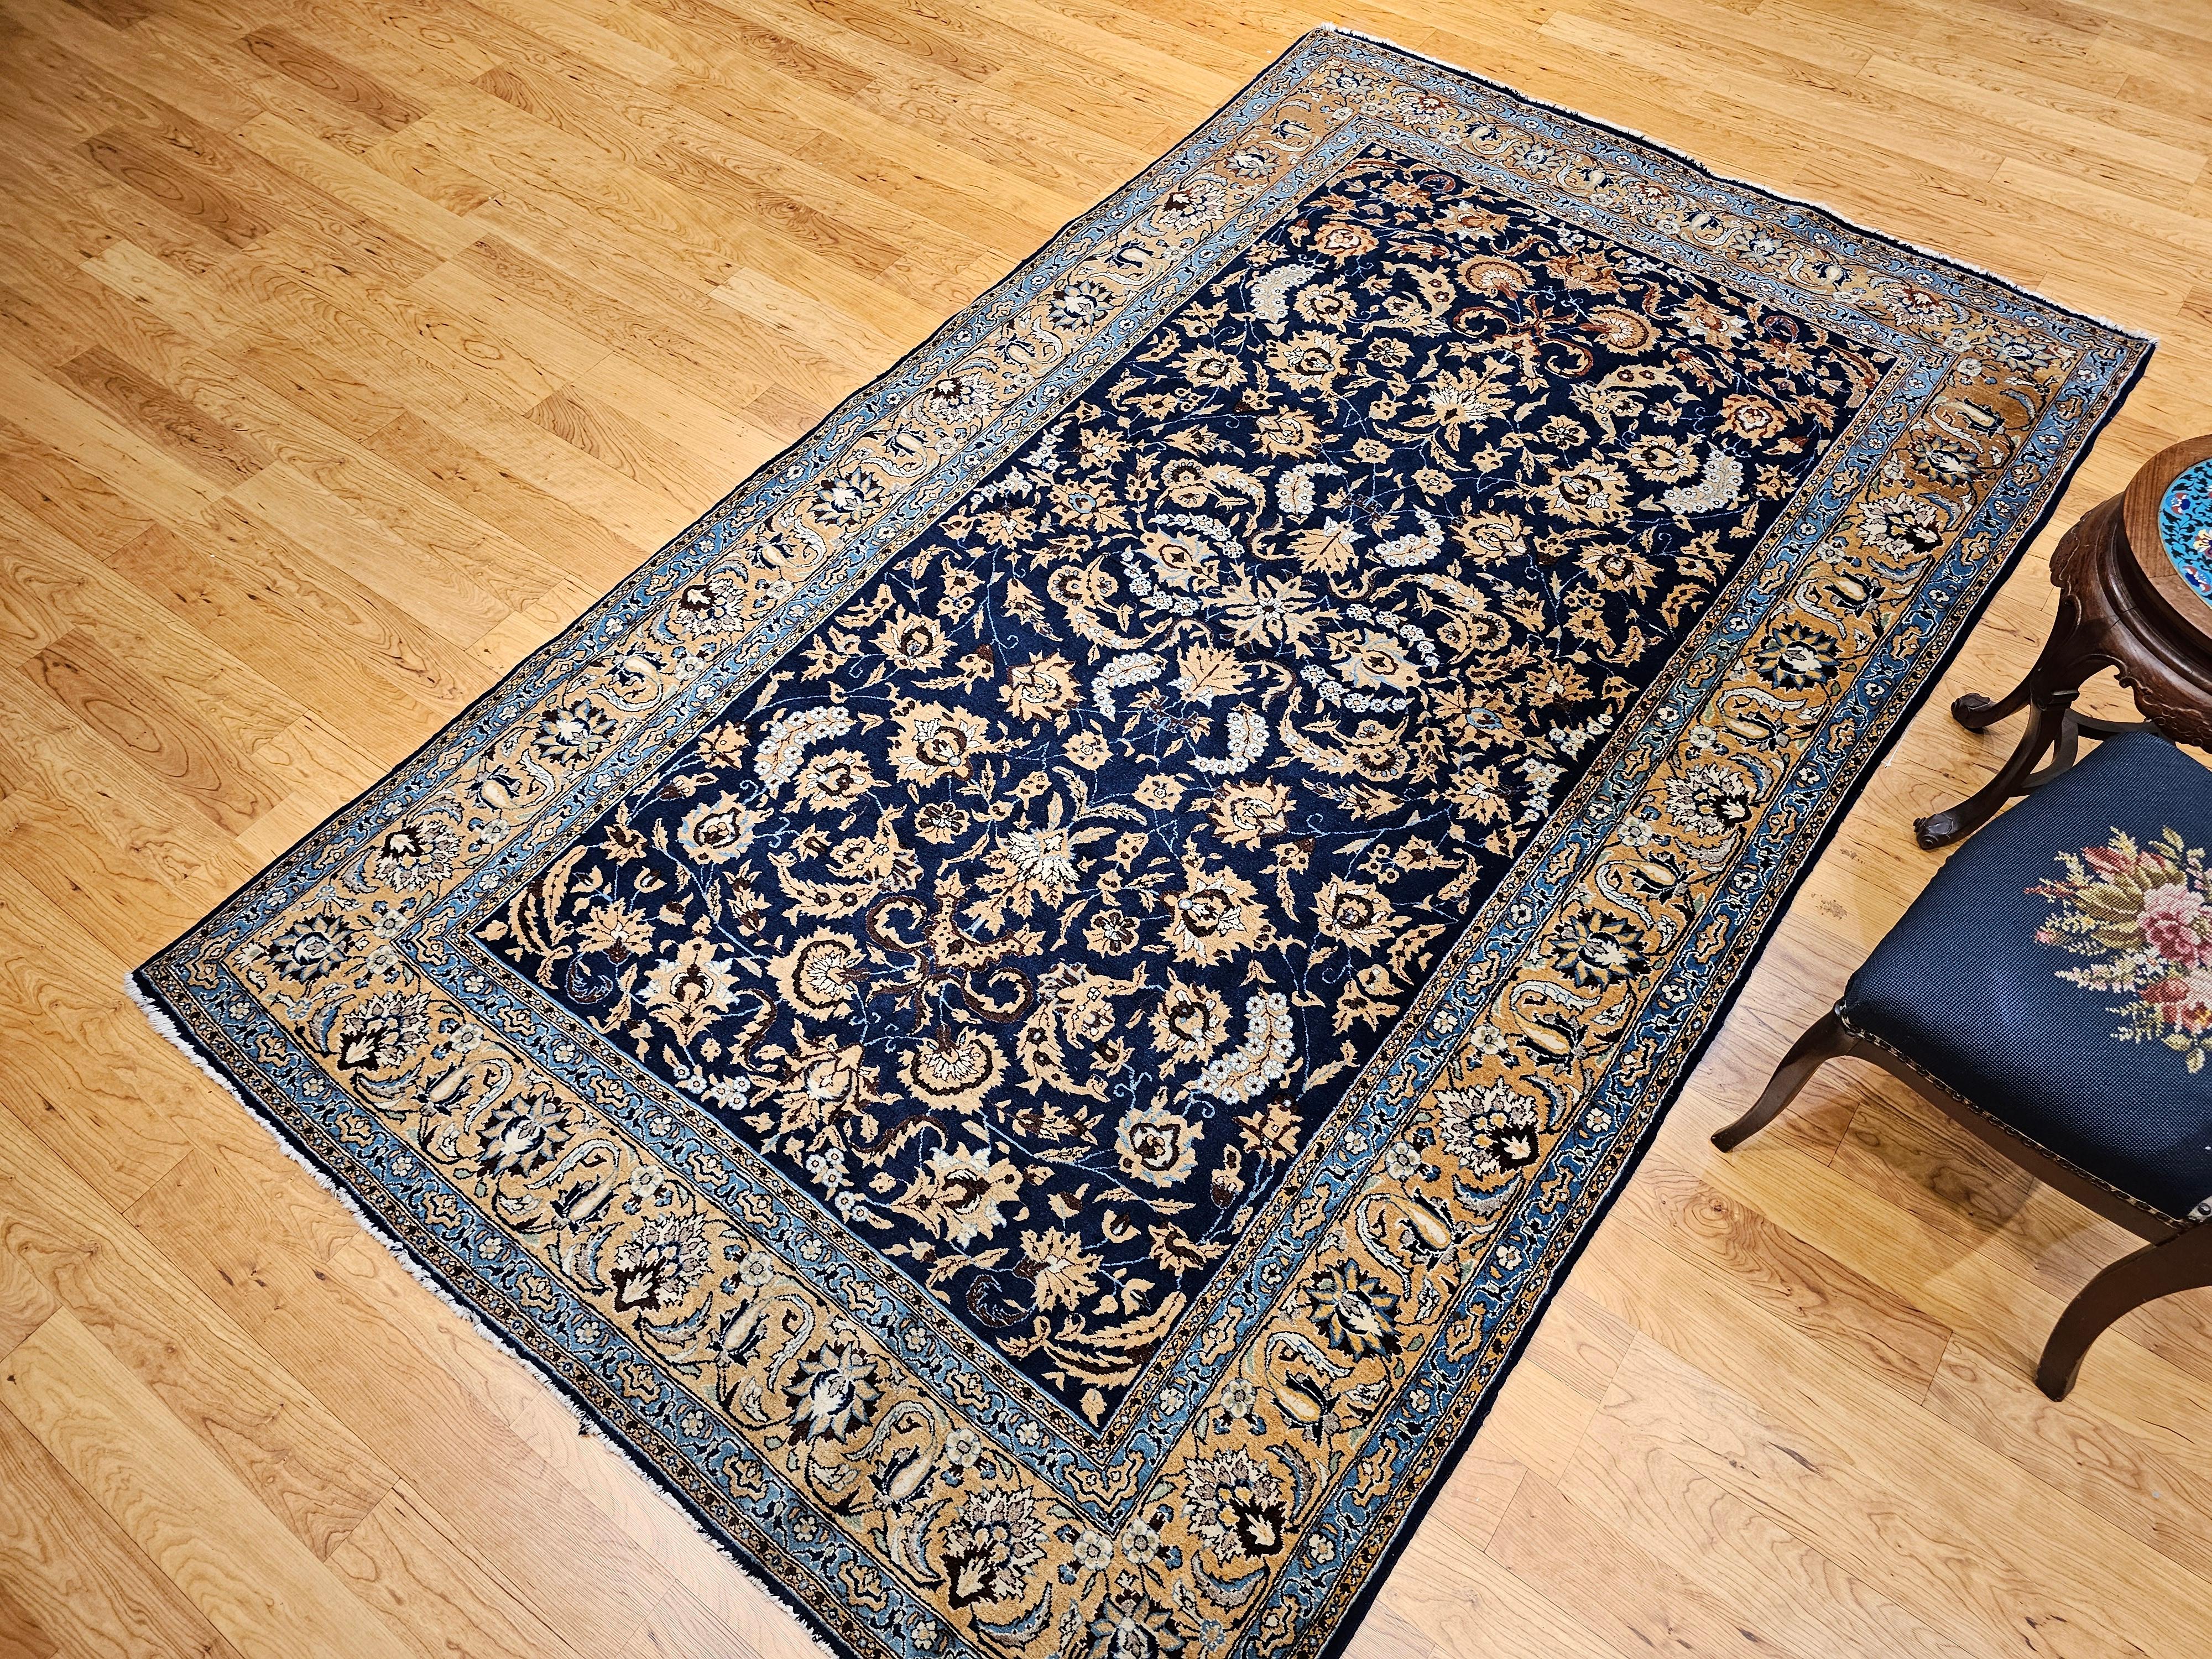 Vintage Persian Tabriz in an Allover Pattern in Navy Blue, Tan, Brown, Baby Blue For Sale 7